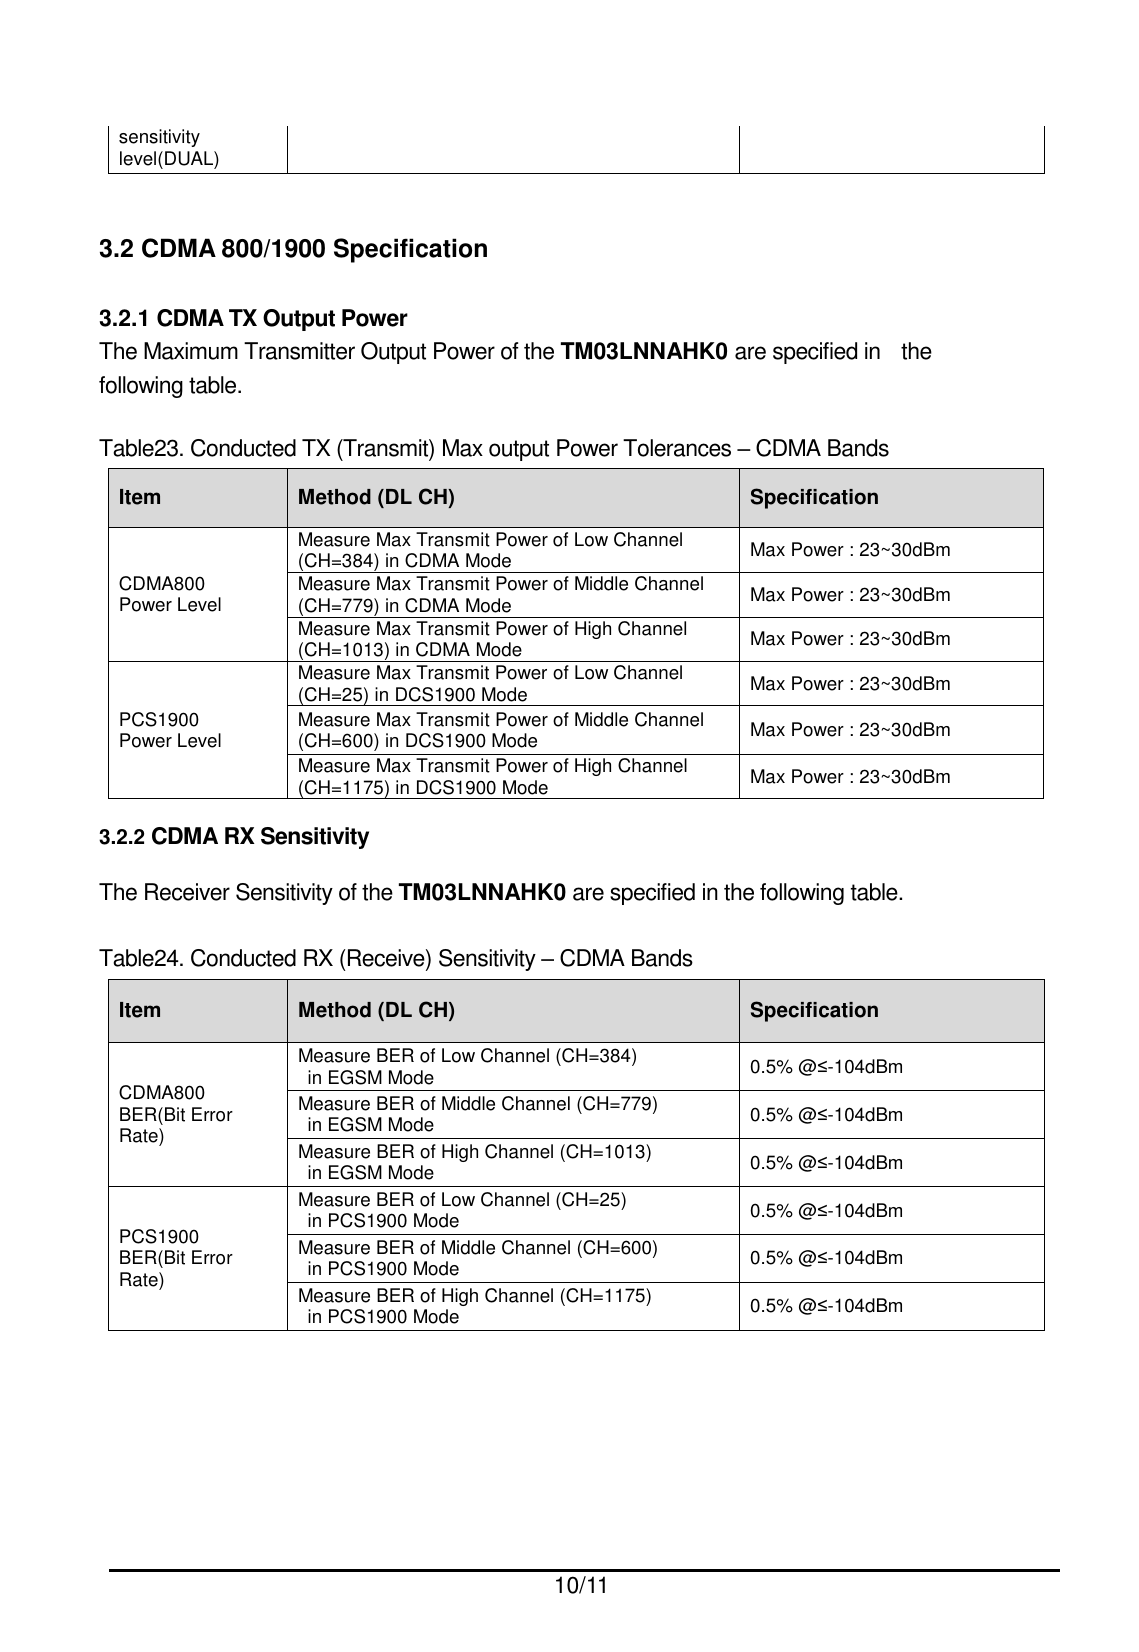  10/11   sensitivity level(DUAL)   3.2 CDMA 800/1900 Specification  3.2.1 CDMA TX Output Power The Maximum Transmitter Output Power of the TM03LNNAHK0 are specified in    the following table.  Table23. Conducted TX (Transmit) Max output Power Tolerances – CDMA Bands Item Method (DL CH) Specification CDMA800 Power Level   Measure Max Transmit Power of Low Channel (CH=384) in CDMA Mode Max Power : 23~30dBm Measure Max Transmit Power of Middle Channel (CH=779) in CDMA Mode Max Power : 23~30dBm Measure Max Transmit Power of High Channel (CH=1013) in CDMA Mode Max Power : 23~30dBm PCS1900   Power Level   Measure Max Transmit Power of Low Channel (CH=25) in DCS1900 Mode Max Power : 23~30dBm   Measure Max Transmit Power of Middle Channel (CH=600) in DCS1900 Mode Max Power : 23~30dBm Measure Max Transmit Power of High Channel (CH=1175) in DCS1900 Mode Max Power : 23~30dBm  3.2.2 CDMA RX Sensitivity  The Receiver Sensitivity of the TM03LNNAHK0 are specified in the following table.  Table24. Conducted RX (Receive) Sensitivity – CDMA Bands Item Method (DL CH) Specification CDMA800 BER(Bit Error Rate) Measure BER of Low Channel (CH=384)   in EGSM Mode 0.5% @≤-104dBm Measure BER of Middle Channel (CH=779)   in EGSM Mode 0.5% @≤-104dBm Measure BER of High Channel (CH=1013)   in EGSM Mode 0.5% @≤-104dBm PCS1900 BER(Bit Error Rate) Measure BER of Low Channel (CH=25)   in PCS1900 Mode 0.5% @≤-104dBm Measure BER of Middle Channel (CH=600)   in PCS1900 Mode 0.5% @≤-104dBm Measure BER of High Channel (CH=1175)   in PCS1900 Mode 0.5% @≤-104dBm        